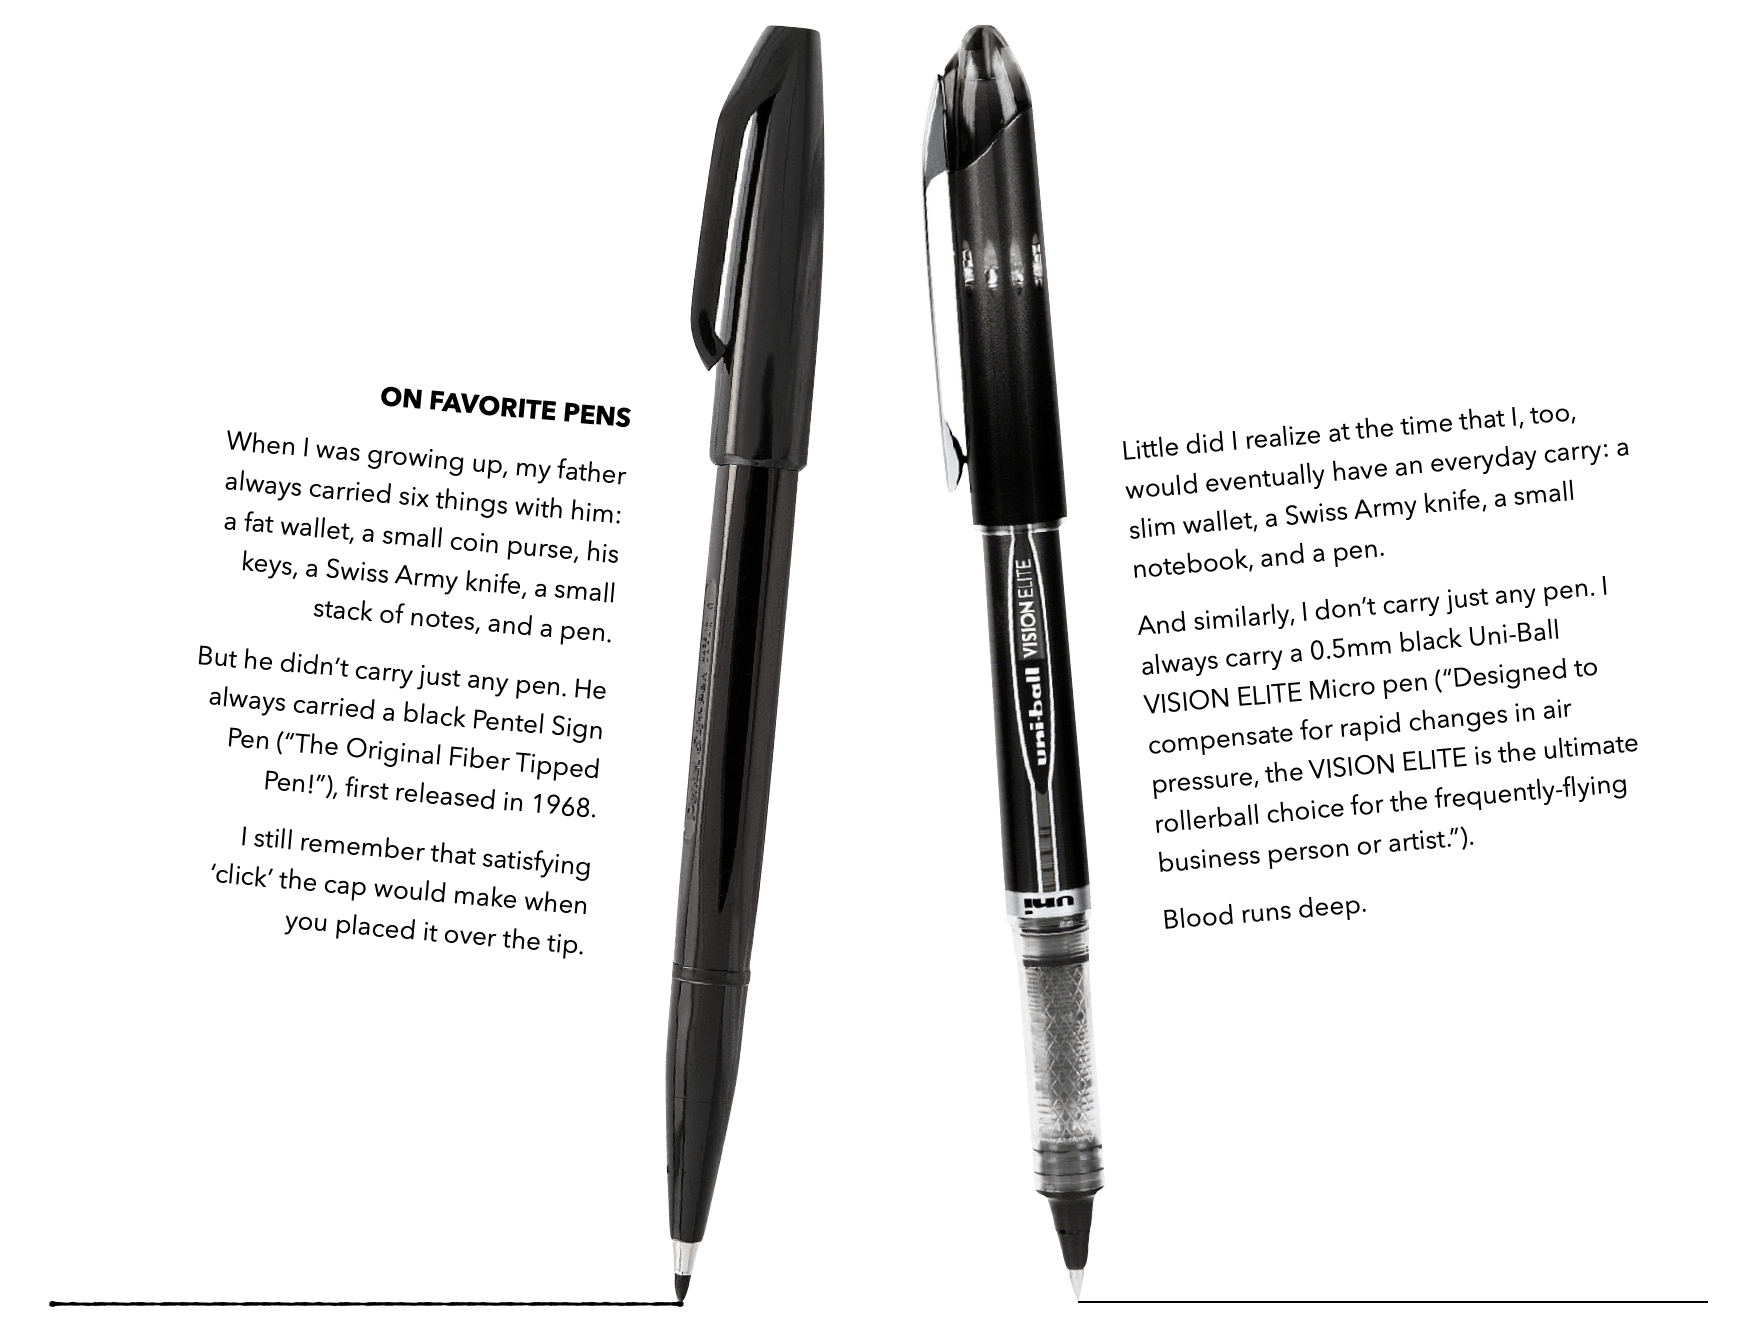 Two pens, side by side, along with the text that appears below in this webpage